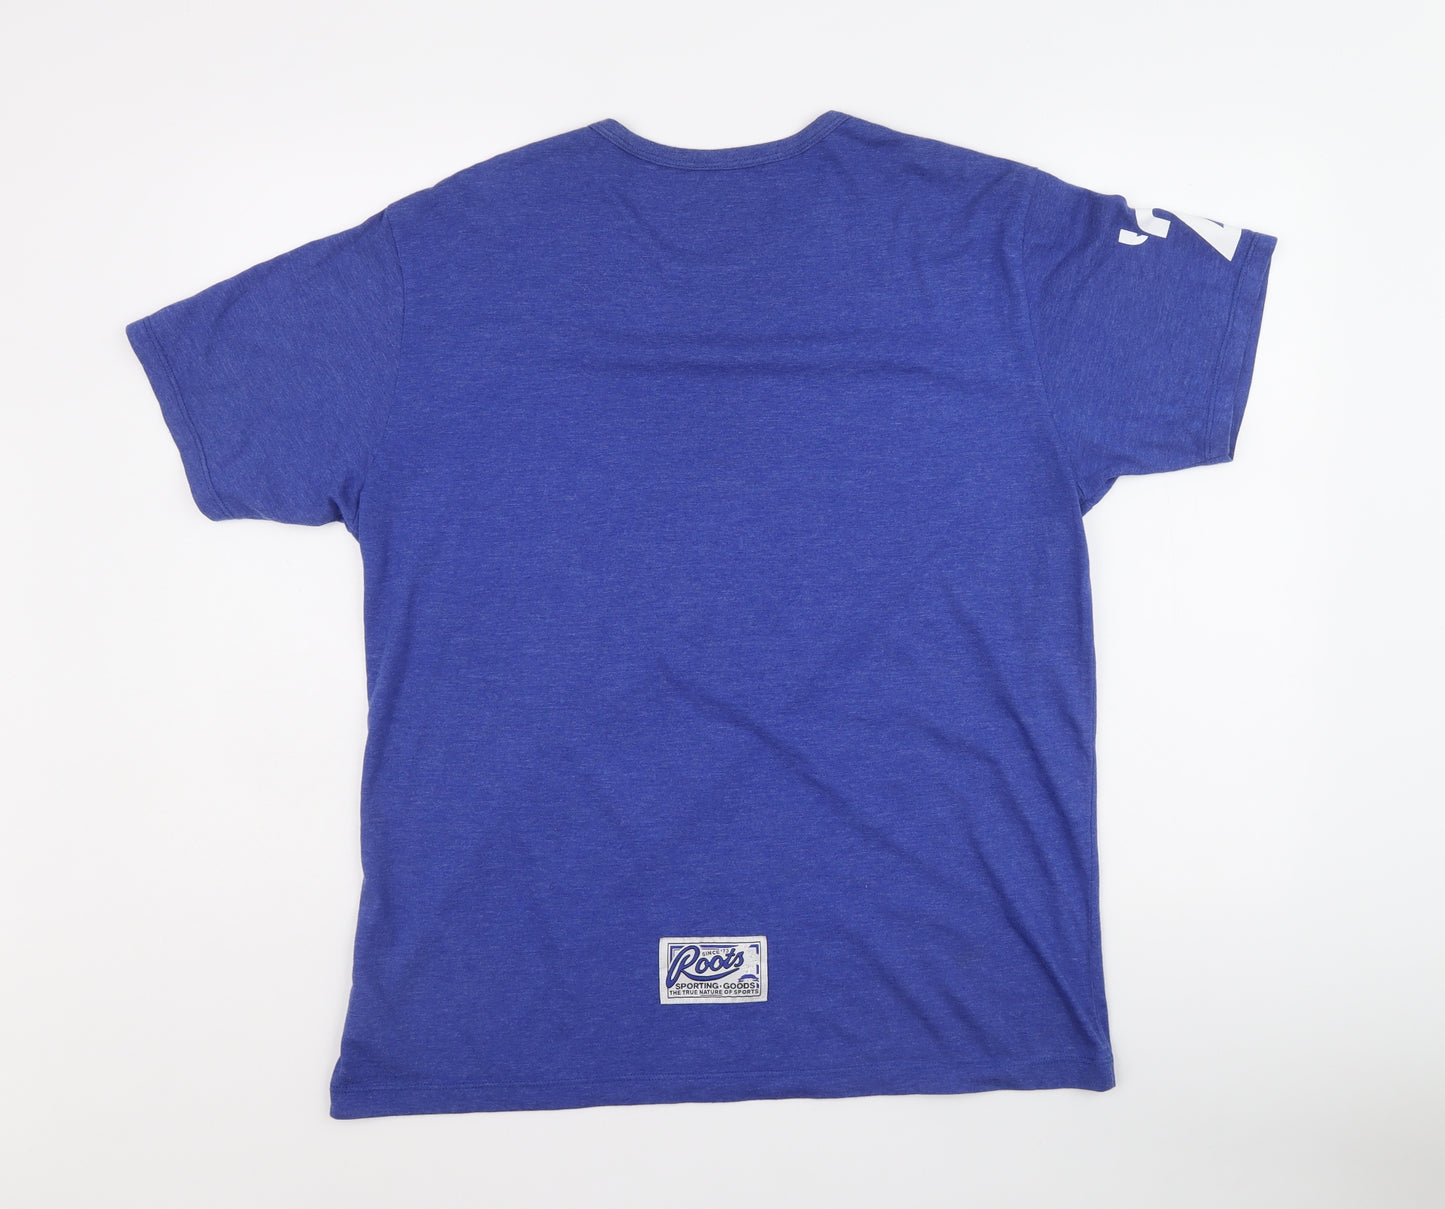 Roots Mens Blue Cotton T-Shirt Size L Crew Neck - Maple leafs hockey club